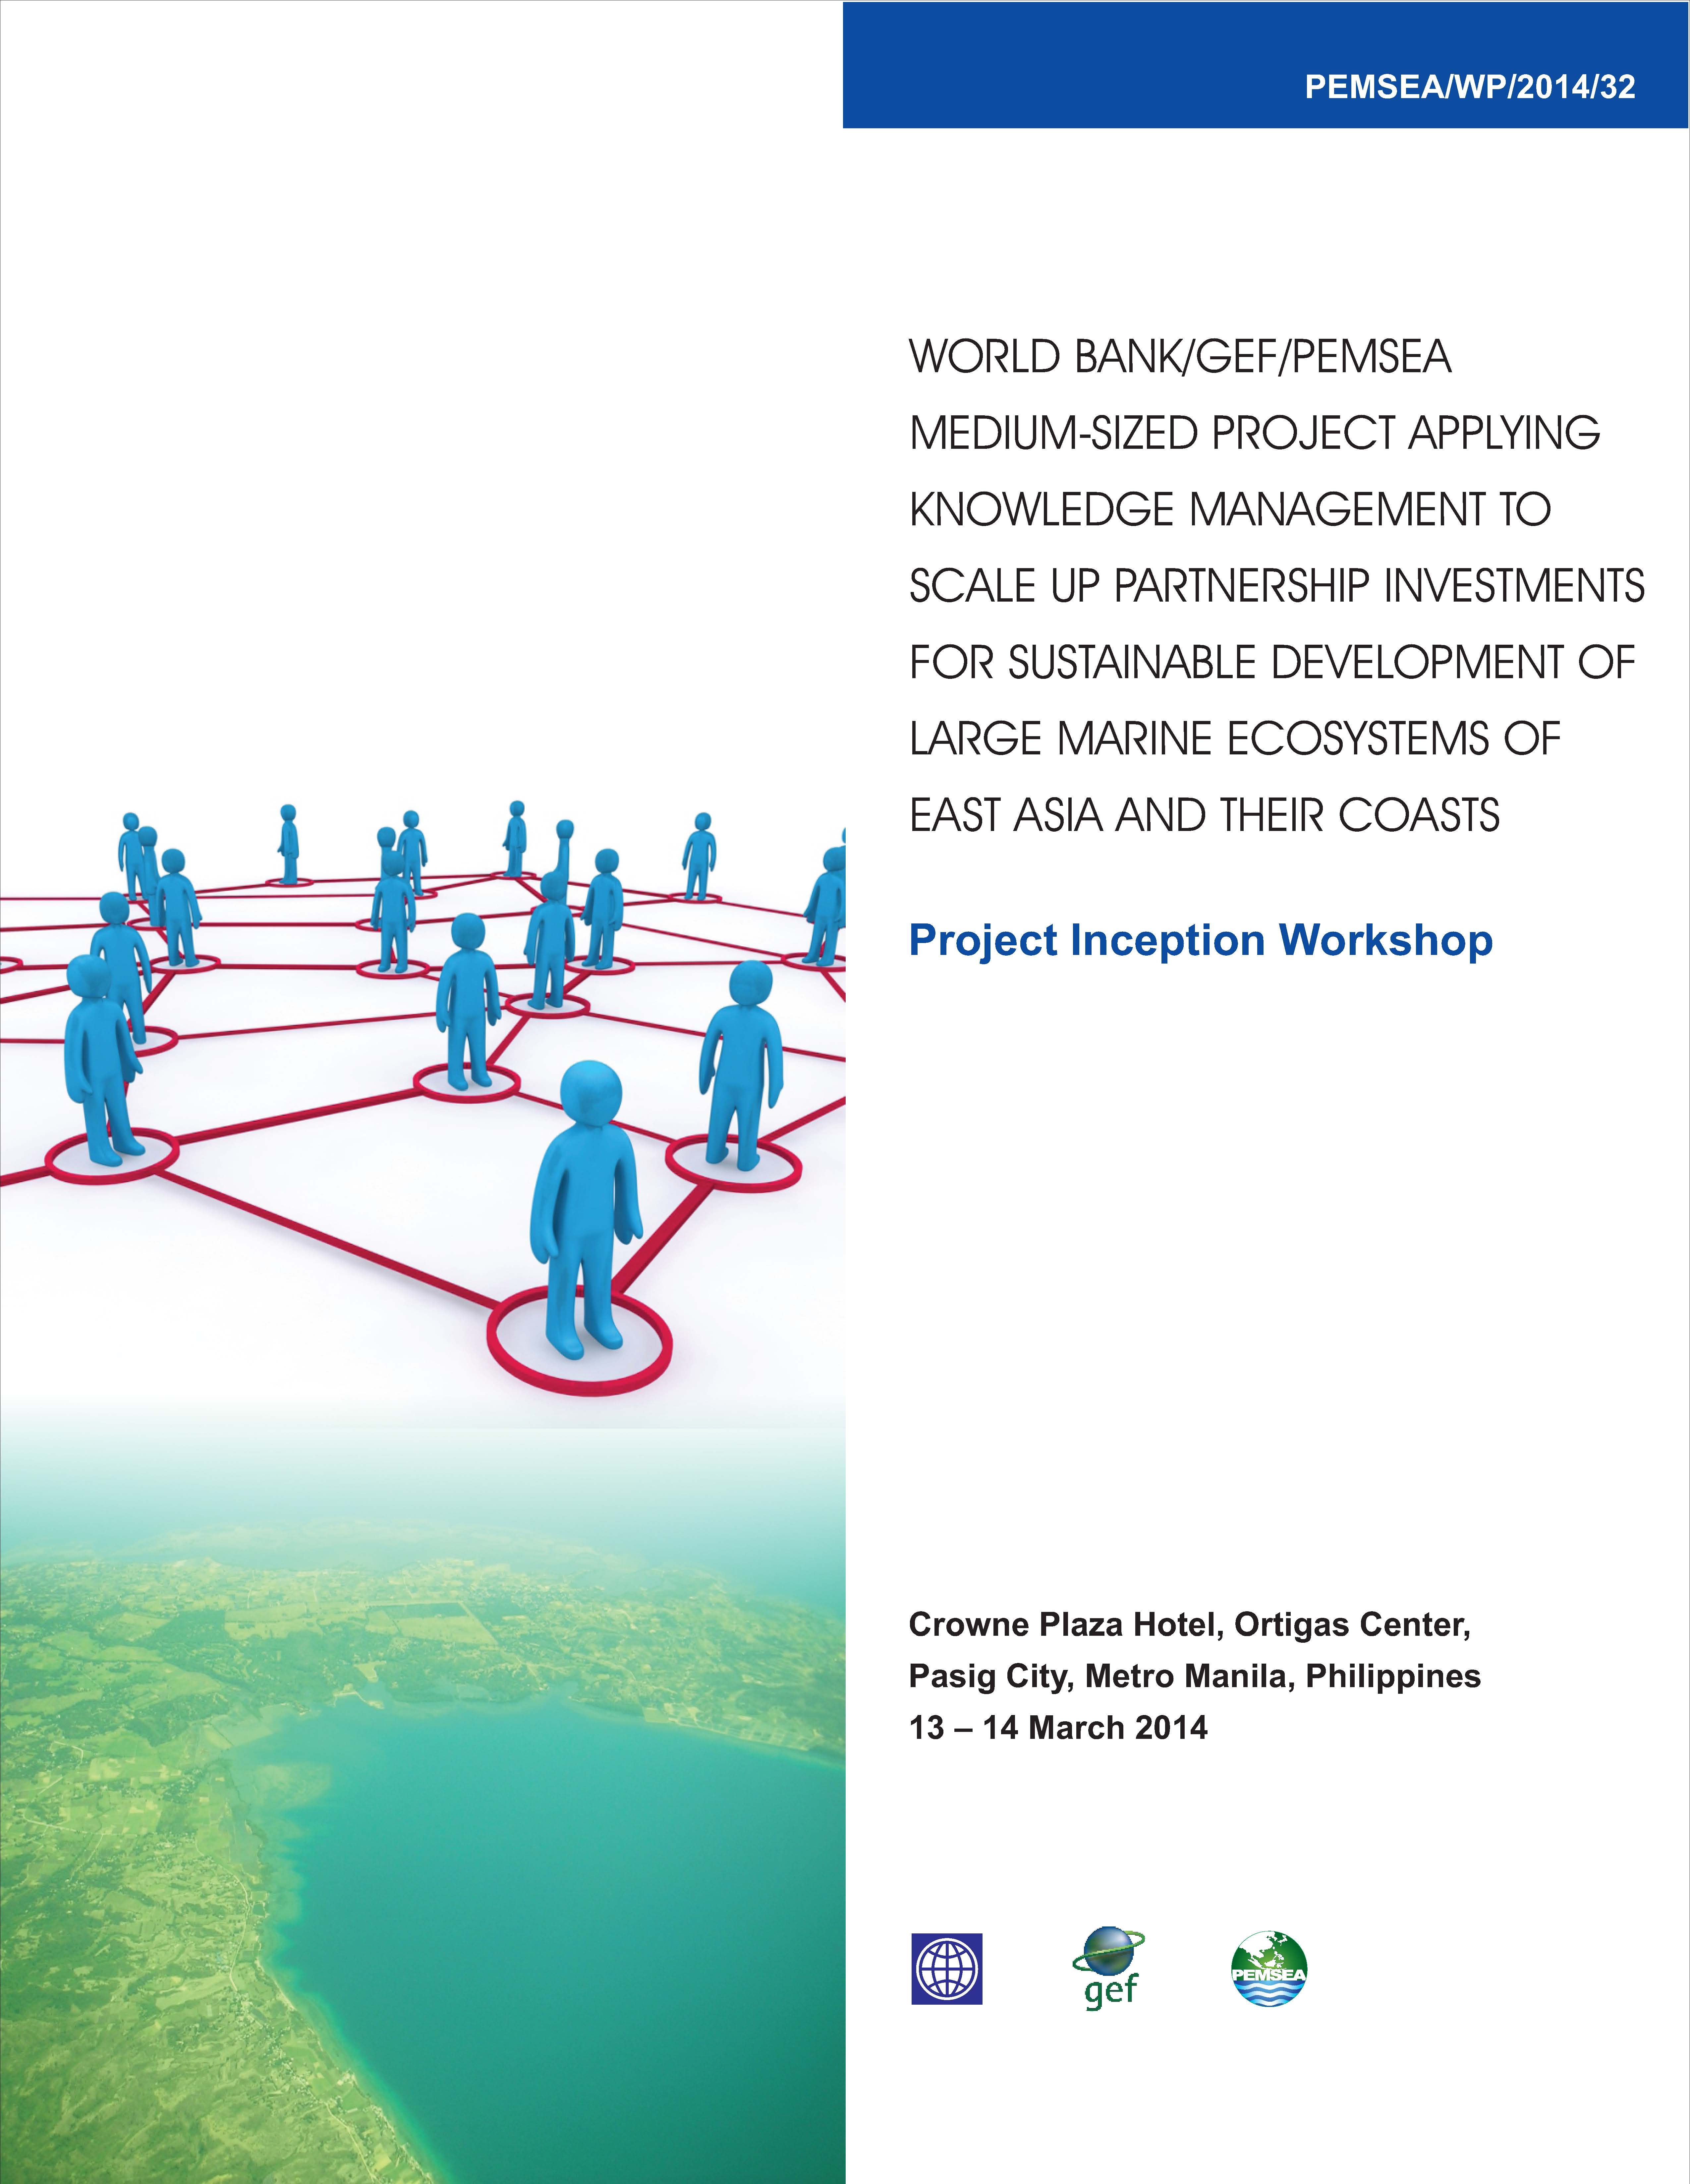 World Bank GEF PEMSEA Medium-Sized Project Applying Knowledge Management to Scale up Partnership Investments for Sustainable Development of Large Marine Ecosystems of East Asia and their Coasts